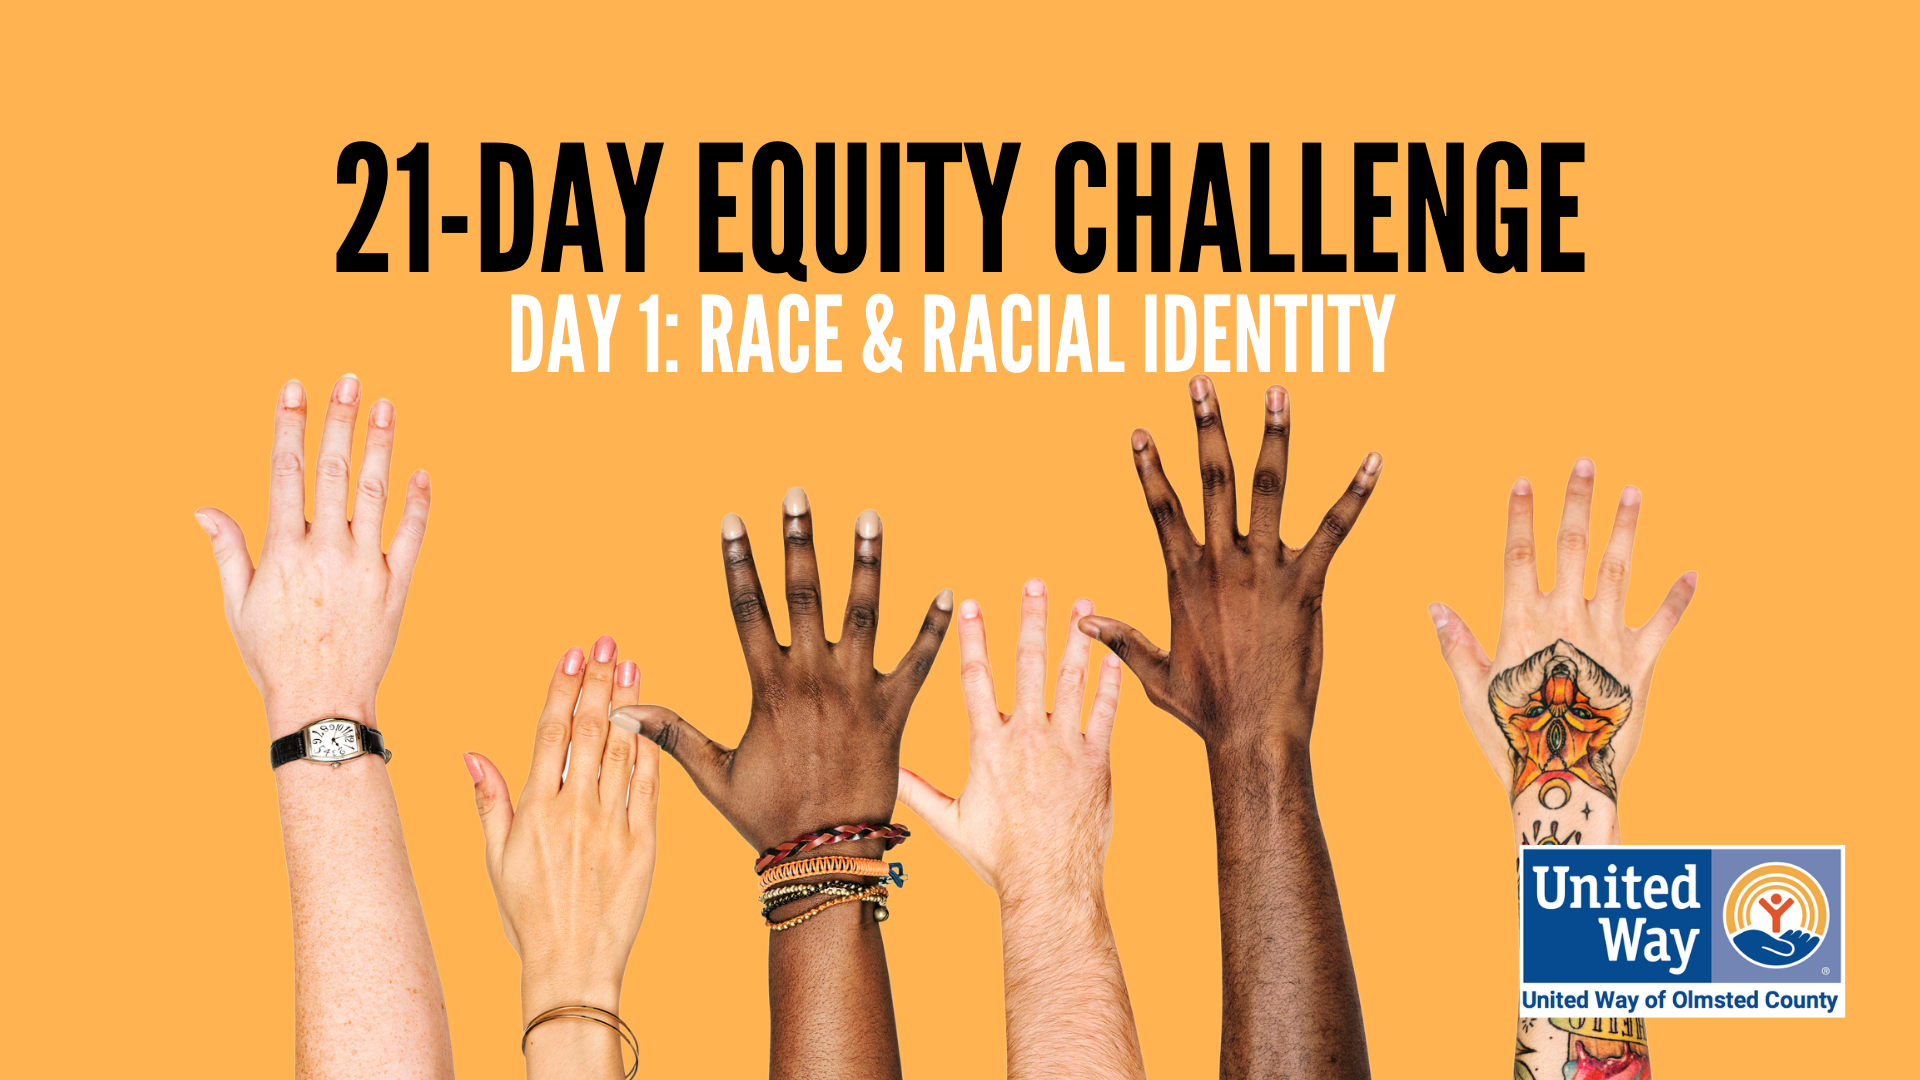 Day 1: Race and Racial Identity